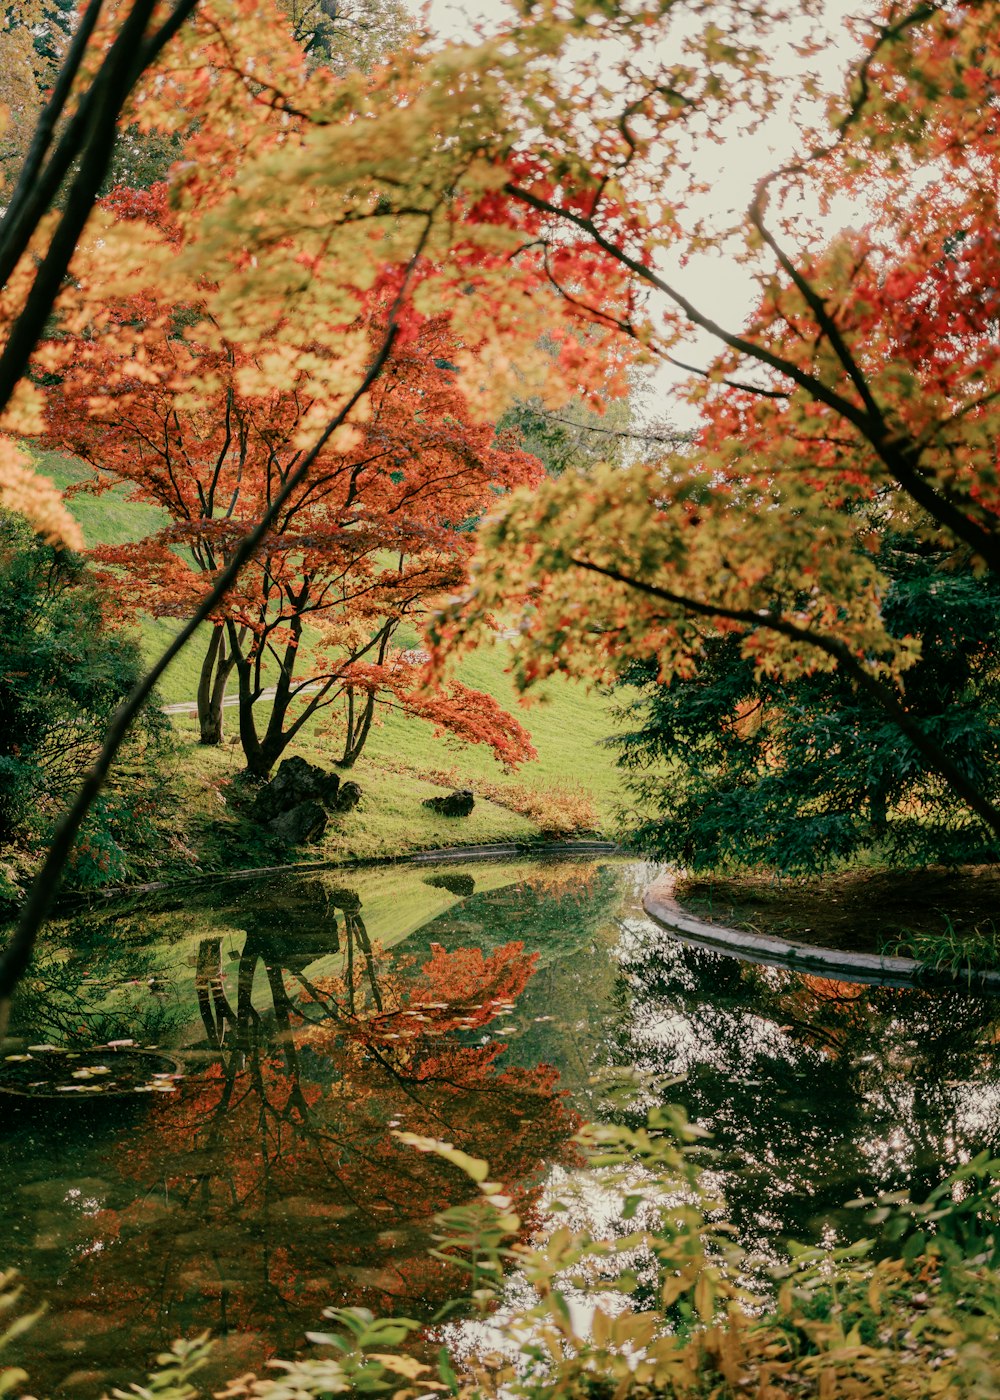 a pond surrounded by trees with red leaves